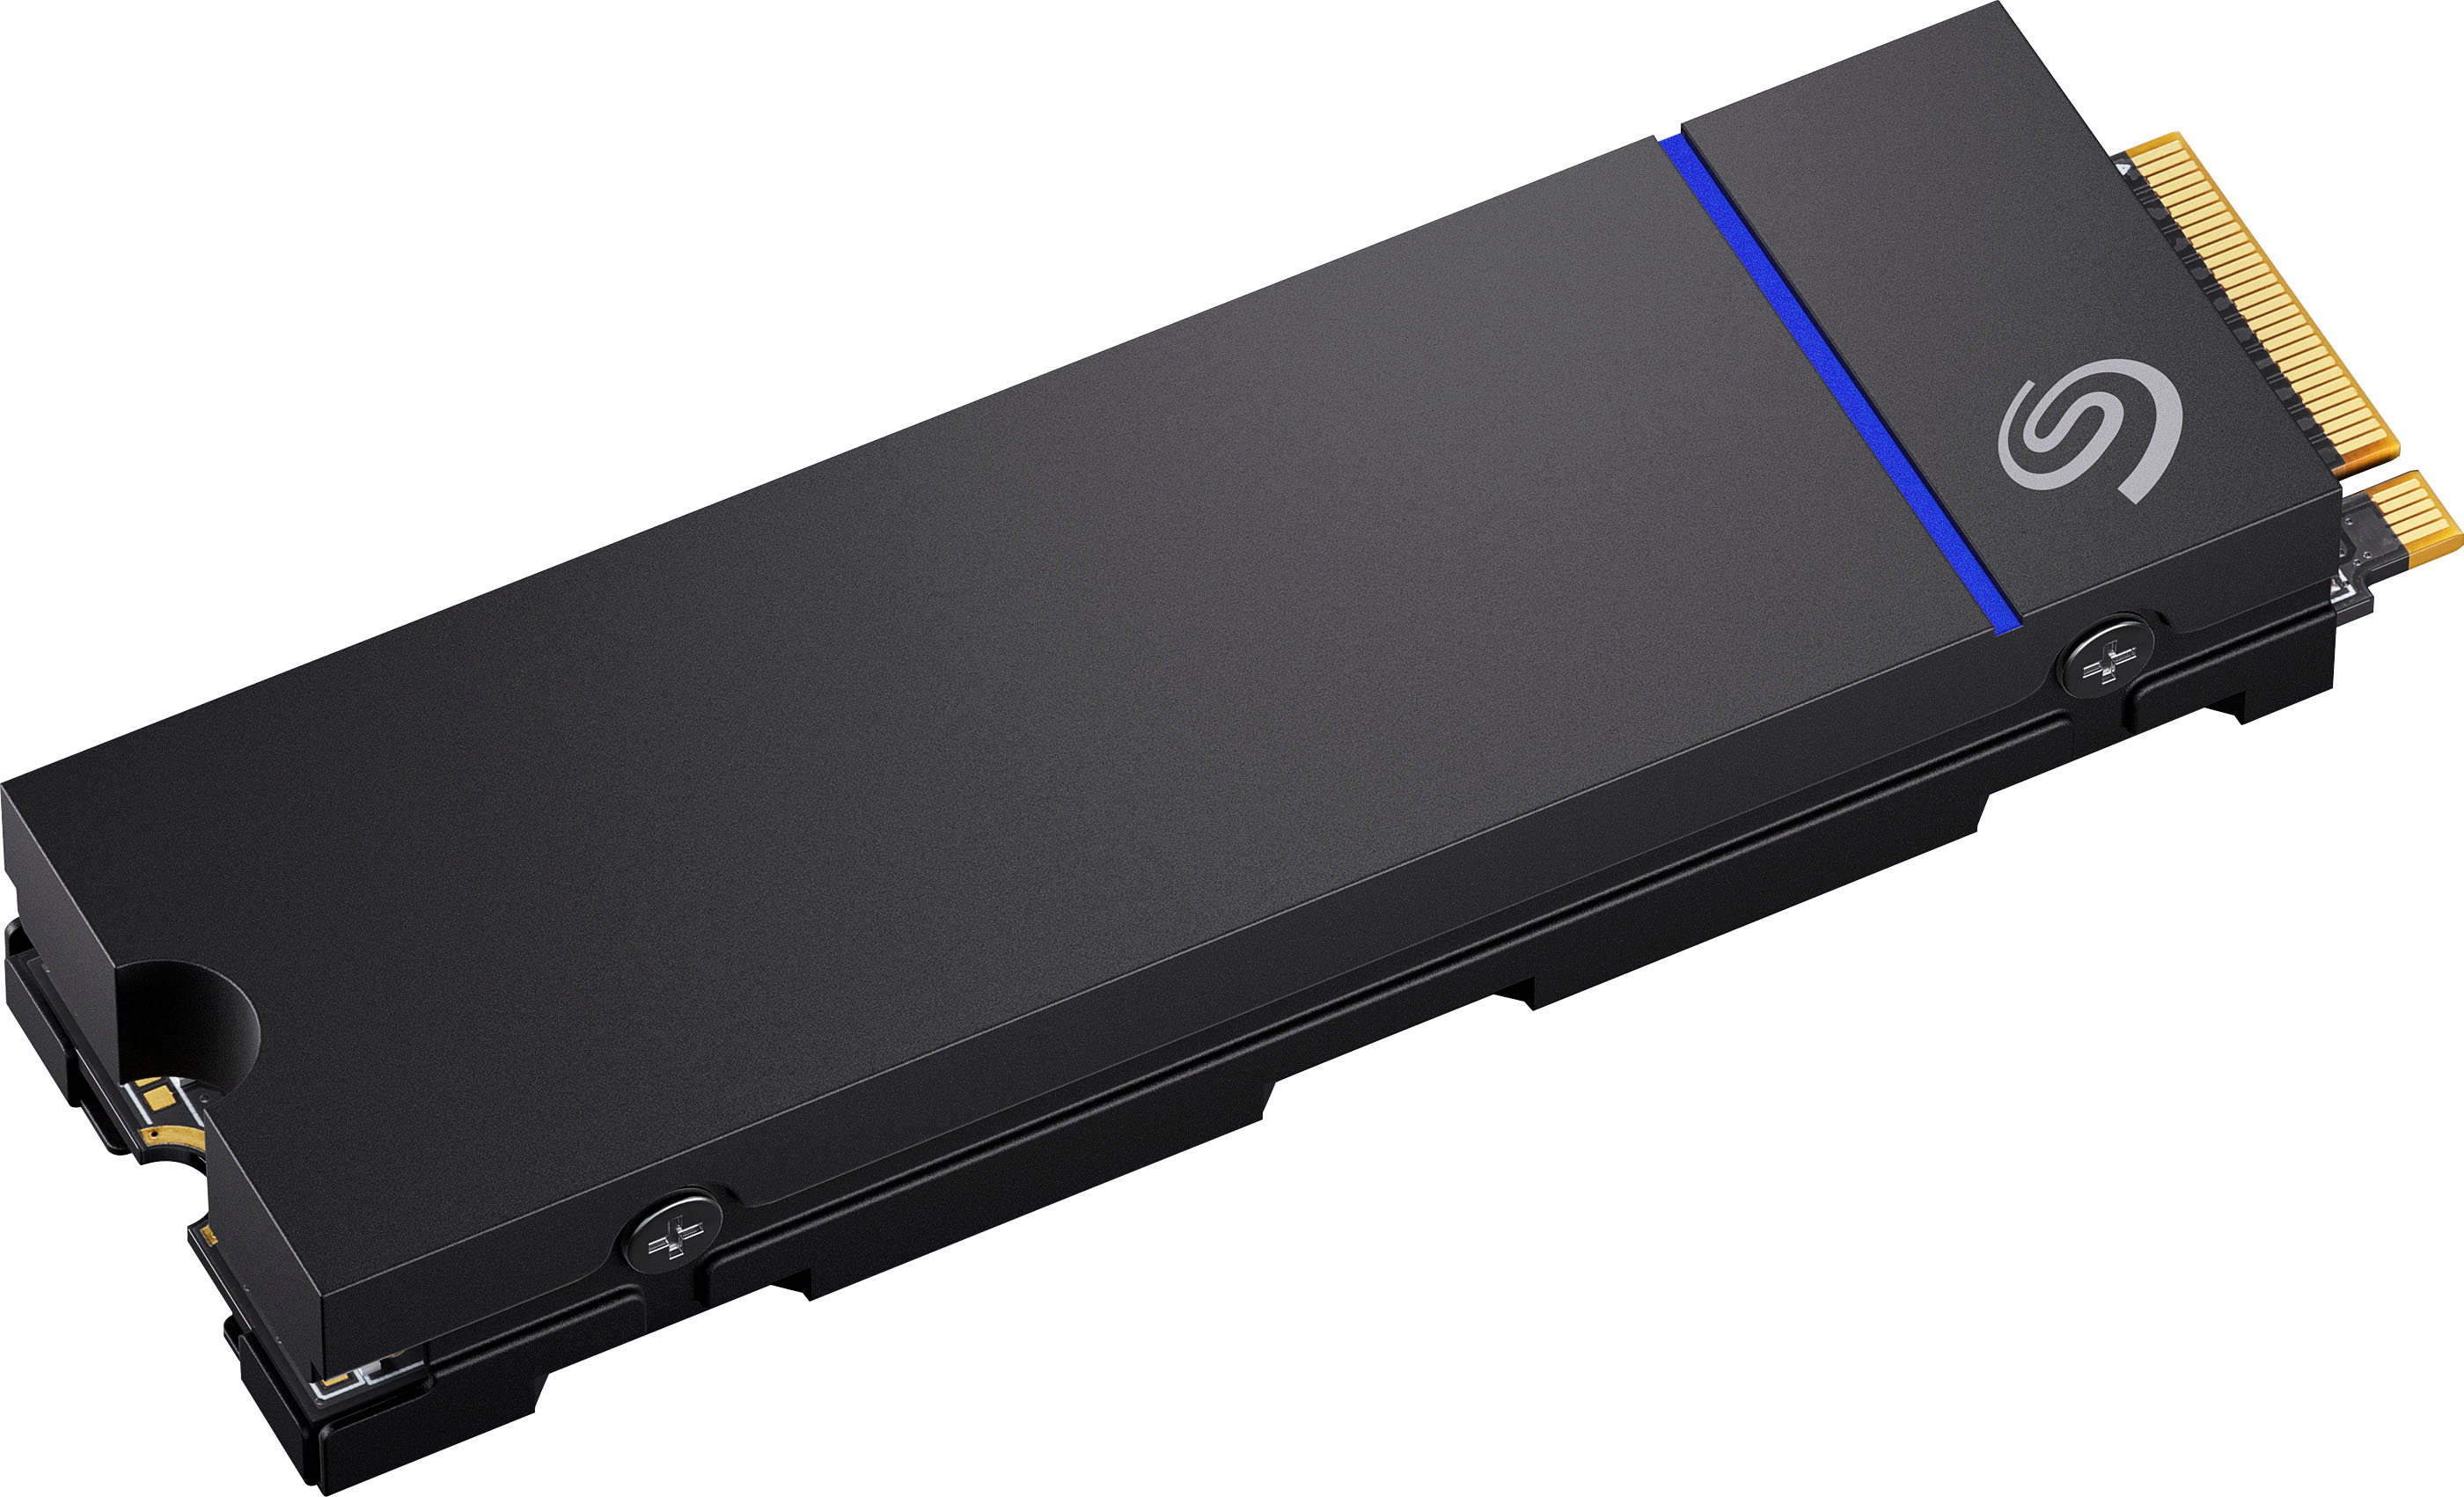  Seagate Game Drive PS5 NVMe SSD for PS5 1TB Internal Solid  State Drive - PCIe Gen4 NVMe 1.4, Officially Licensed, Up to 7300MB/s with  Heatsink (ZP1000GP3A1011) : Electronics